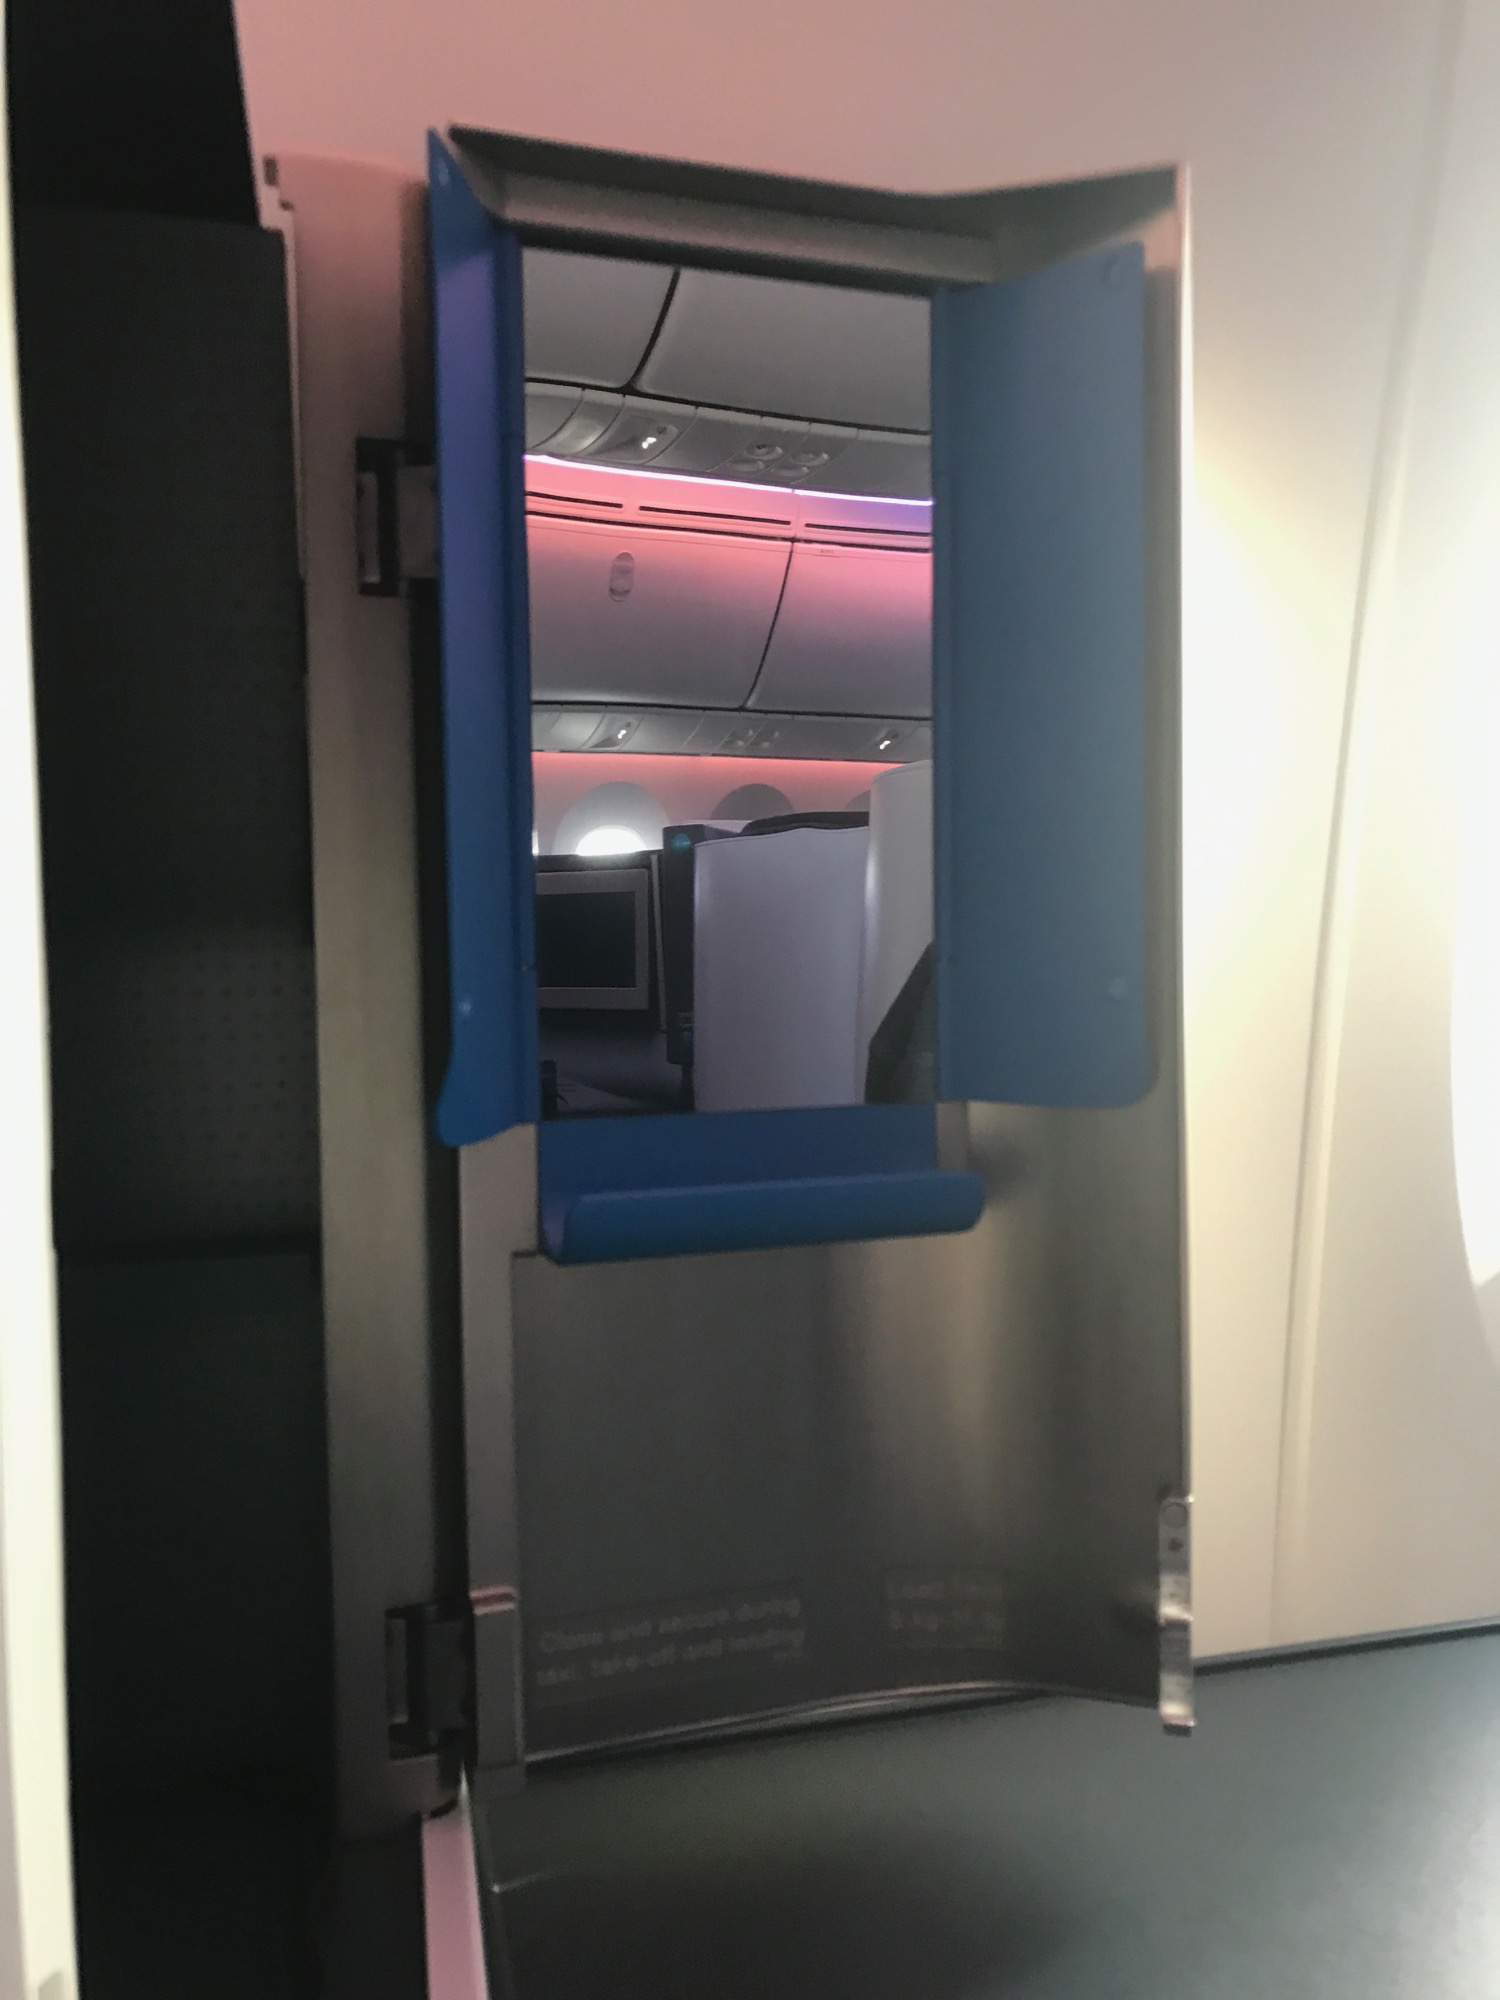 KLM 787 Business Class Review - 95